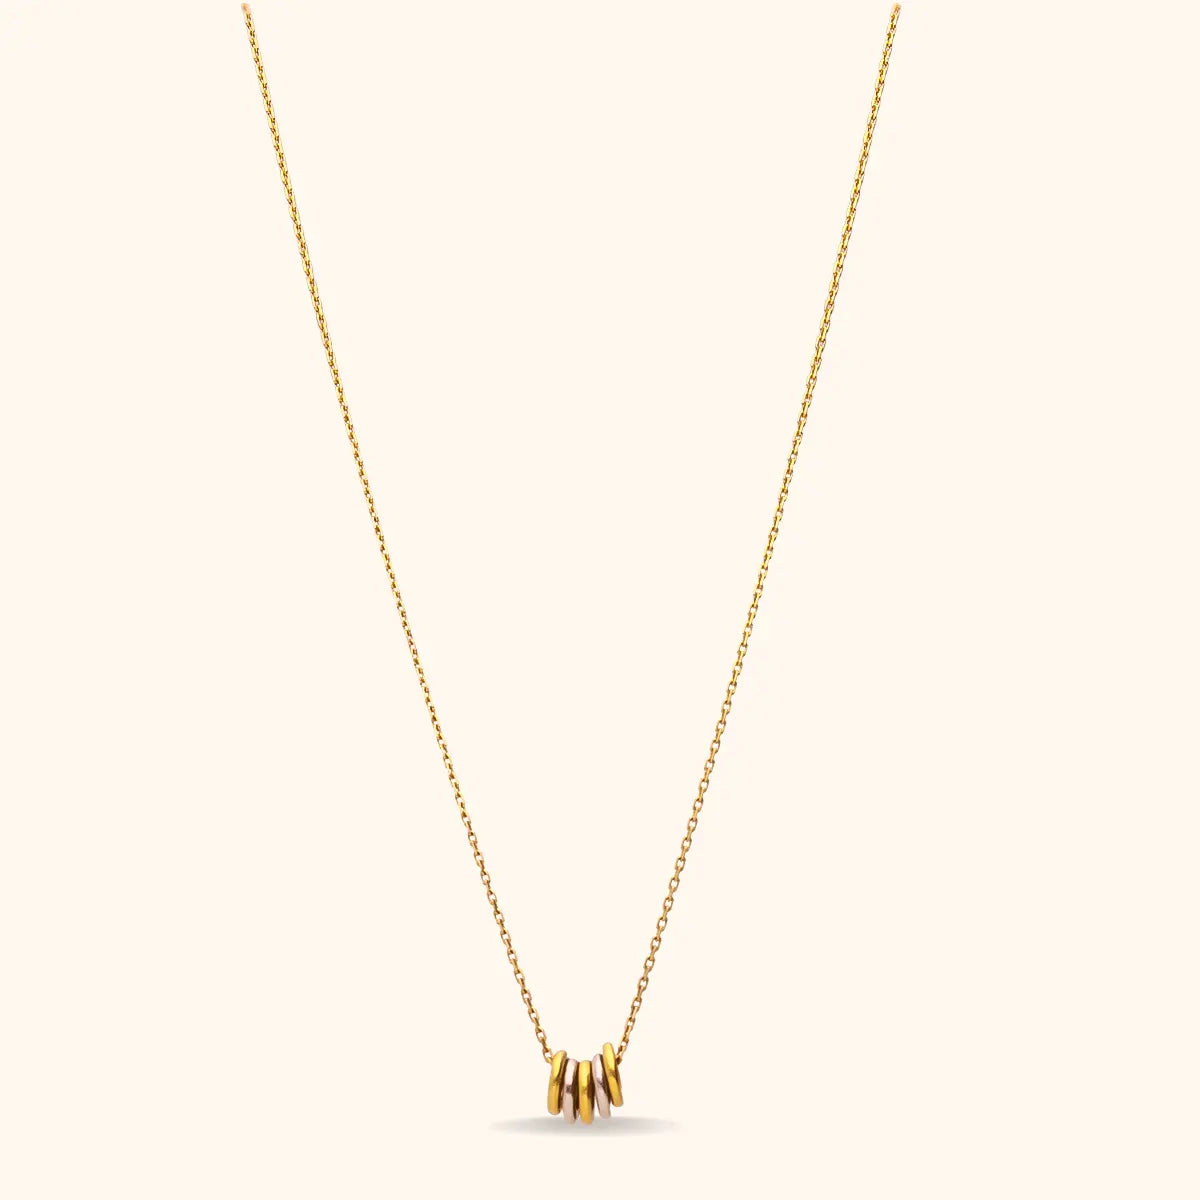 Linked in Love - Gold Necklace